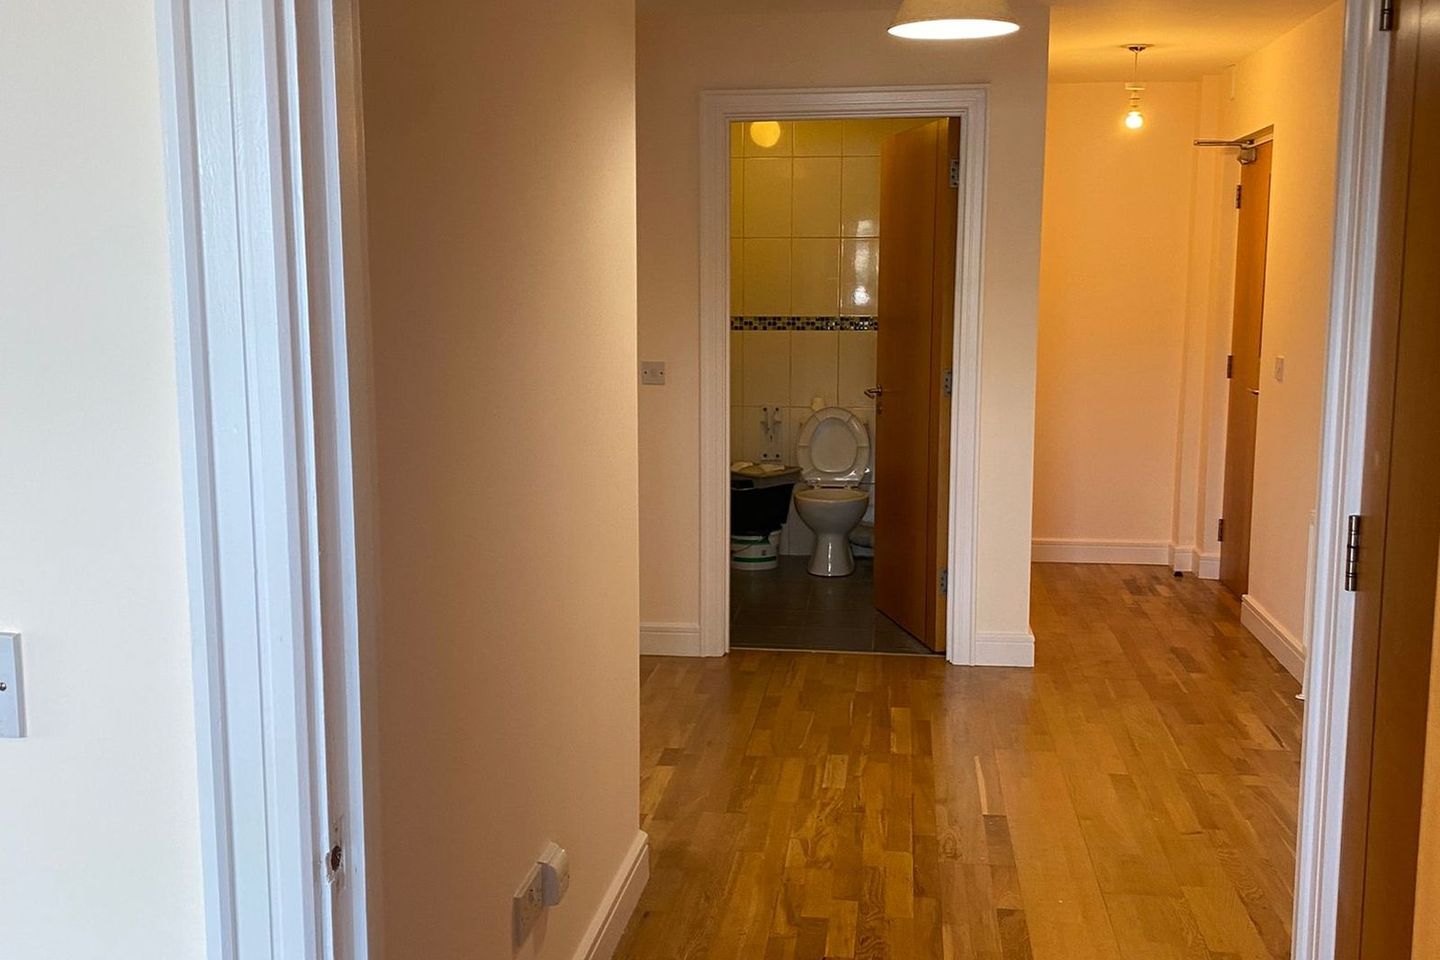 Apartment 45, Grand Central, Letterkenny, Co. Donegal, F92K585